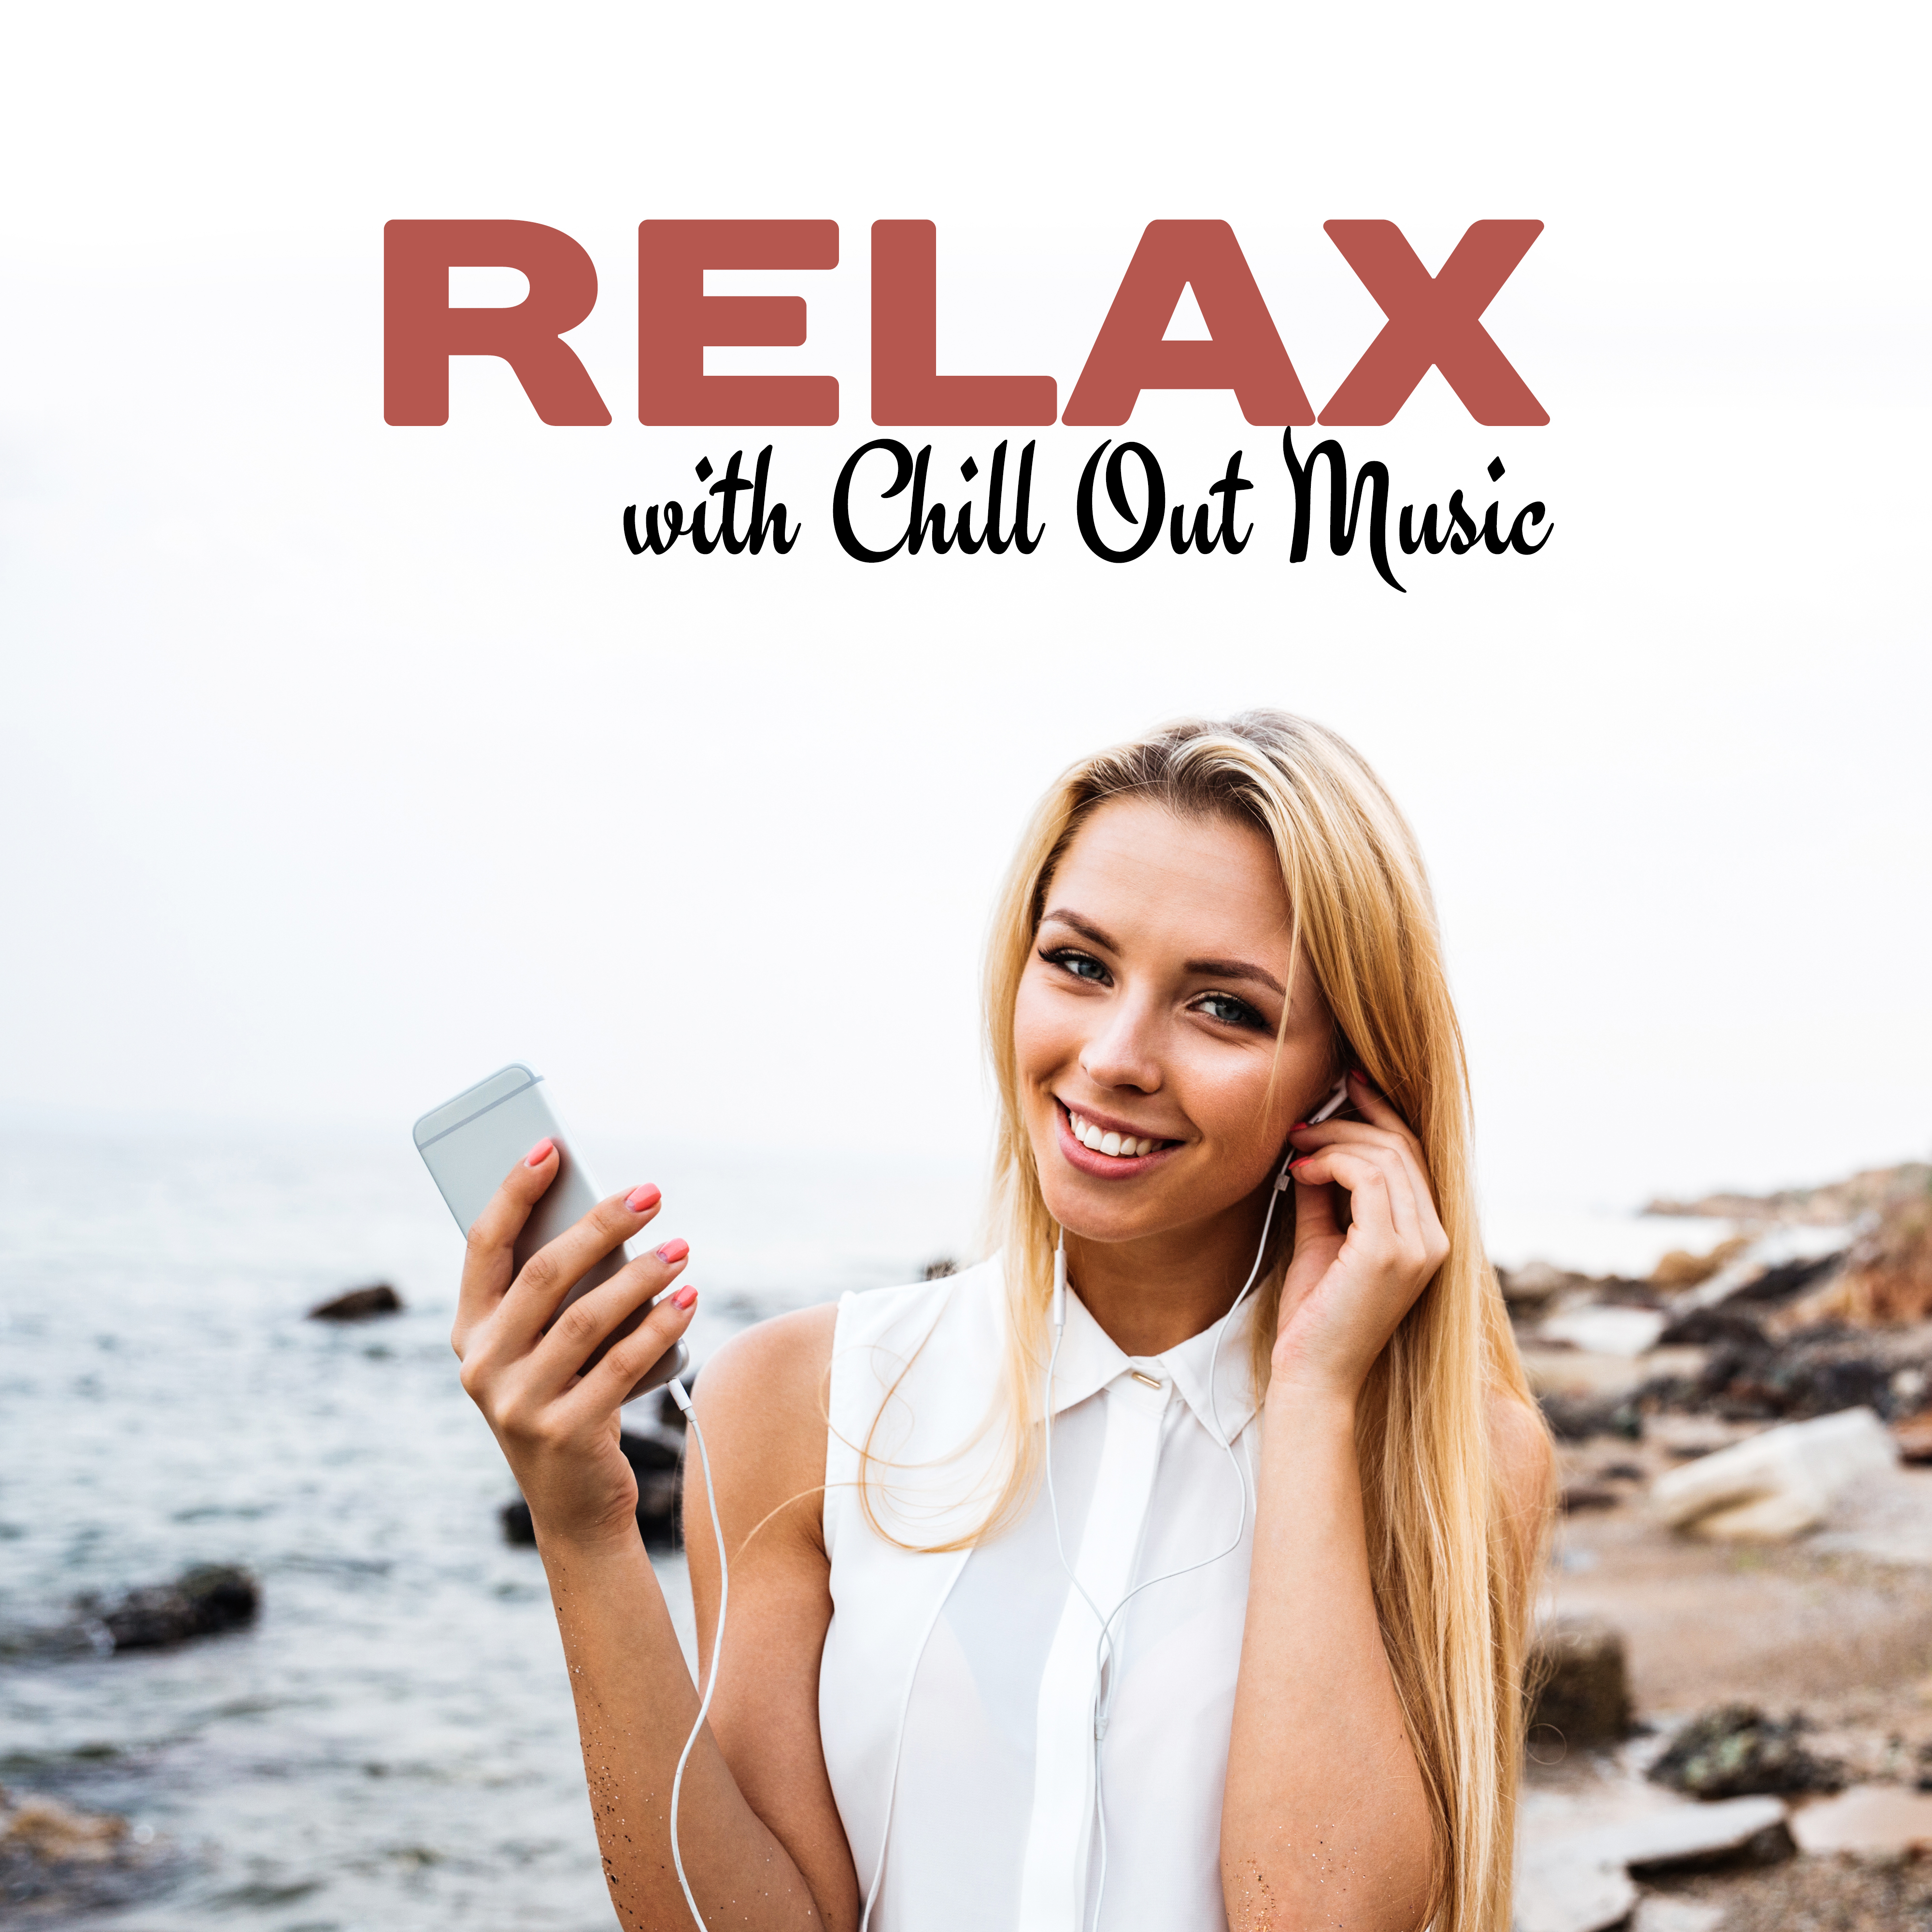 Relax with Chill Out Music – Summer 2017, Ibiza Relaxing Vibes, Holiday Relaxation, Peaceful Beach Music